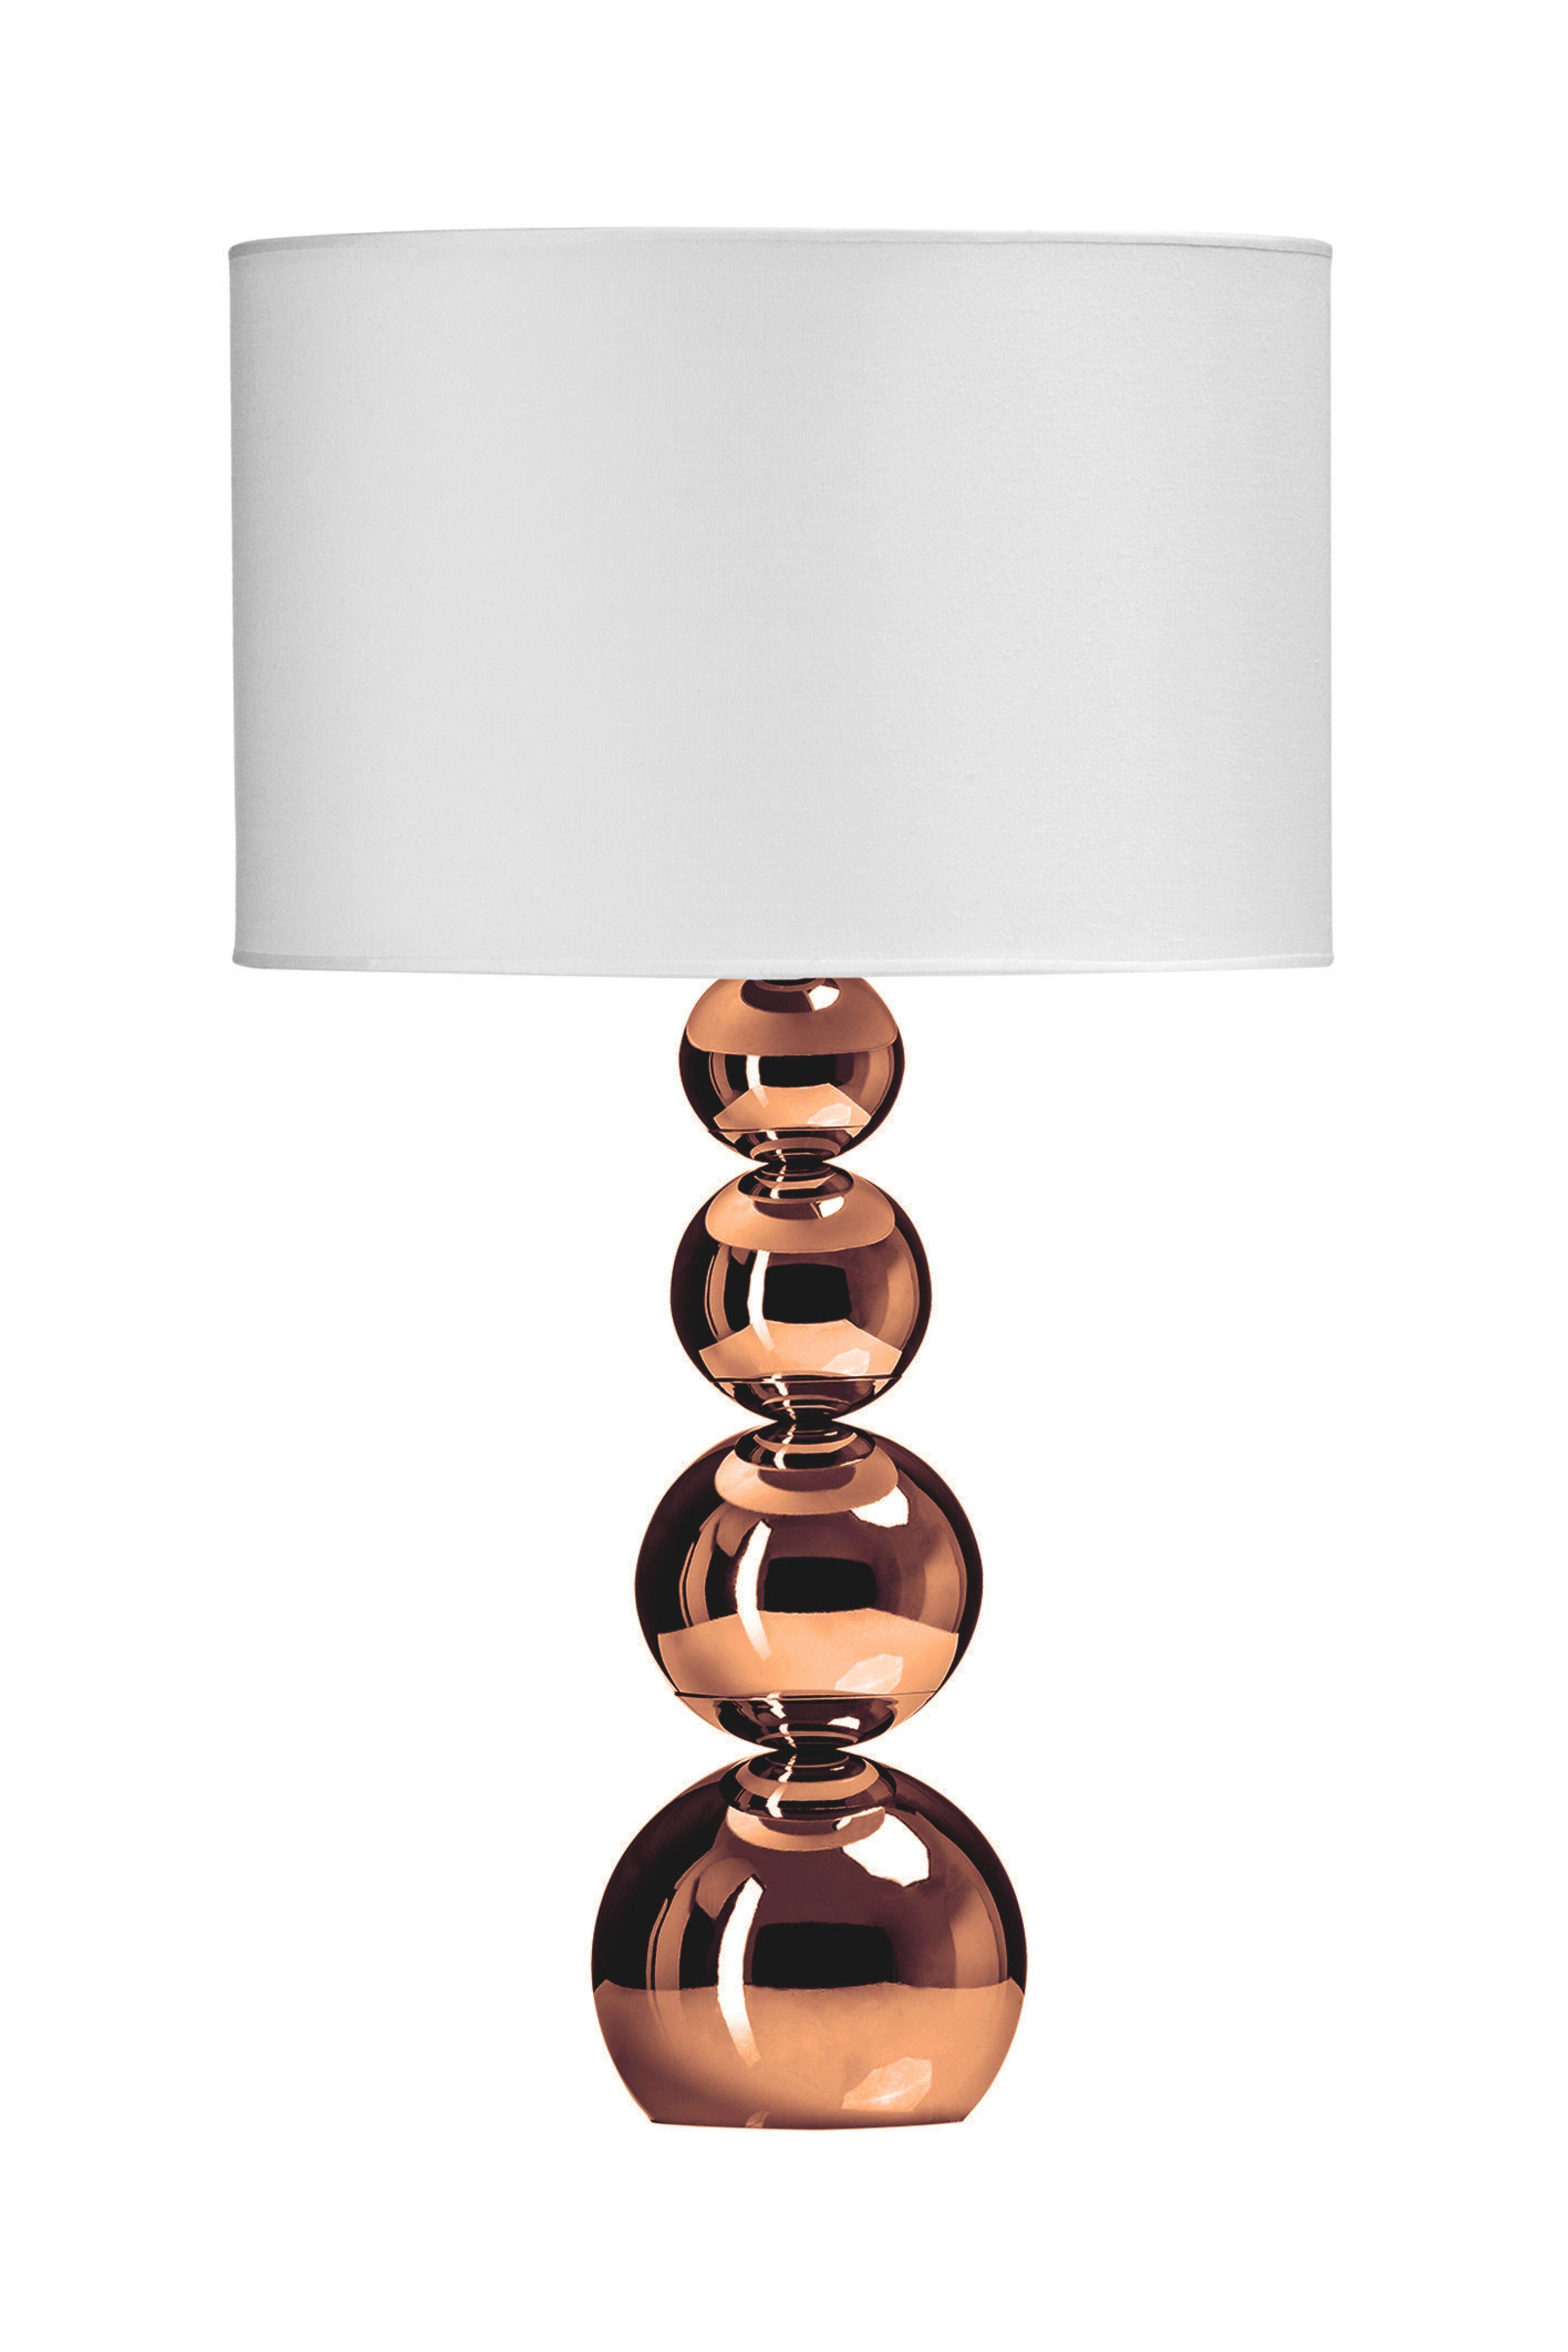 Interiors by Premier Cameo Touch Lamp with UK Plug